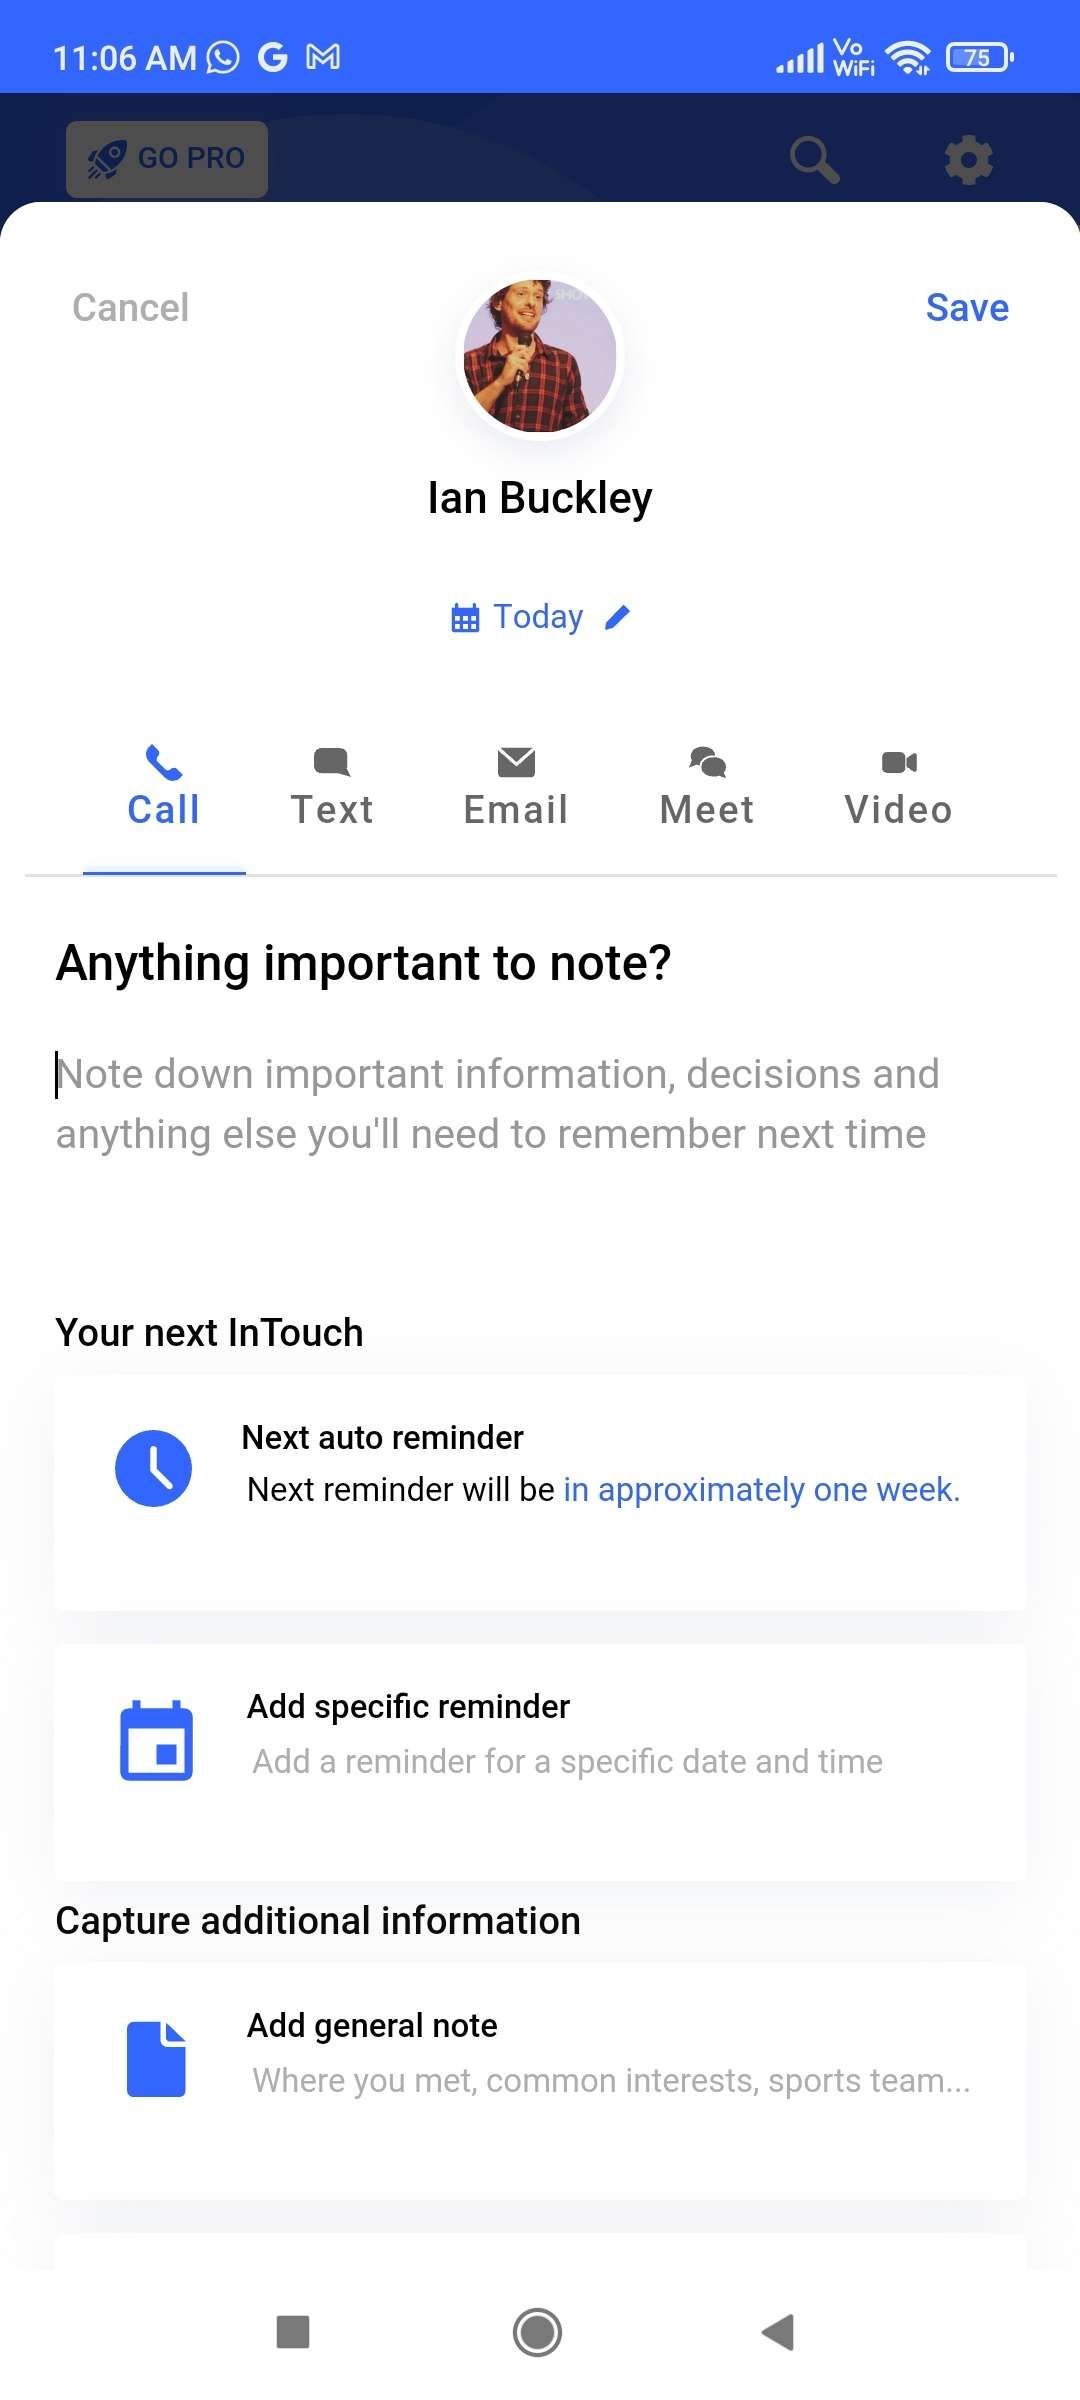 You can save all contact information about a person in one place, note important information about them, and add non-automatic reminders to get in touch on a certain date